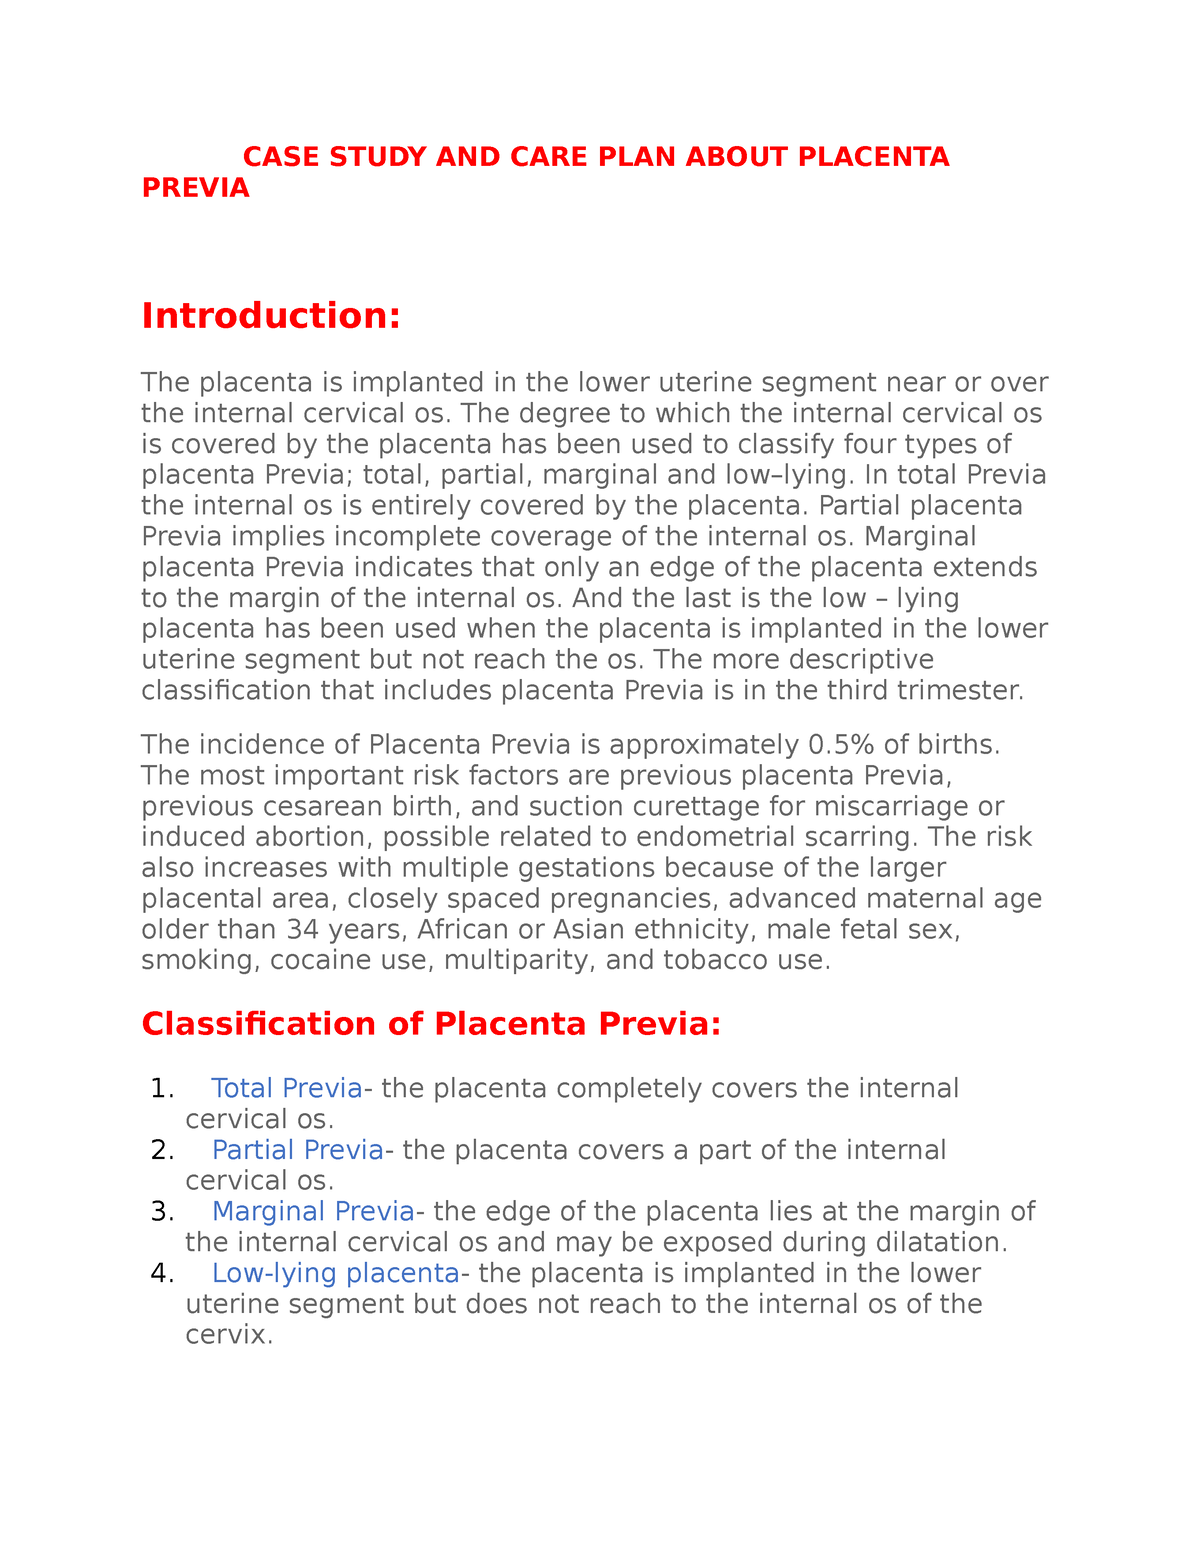 Placenta Previa Case Study And Care Plan Case Study And Care Plan